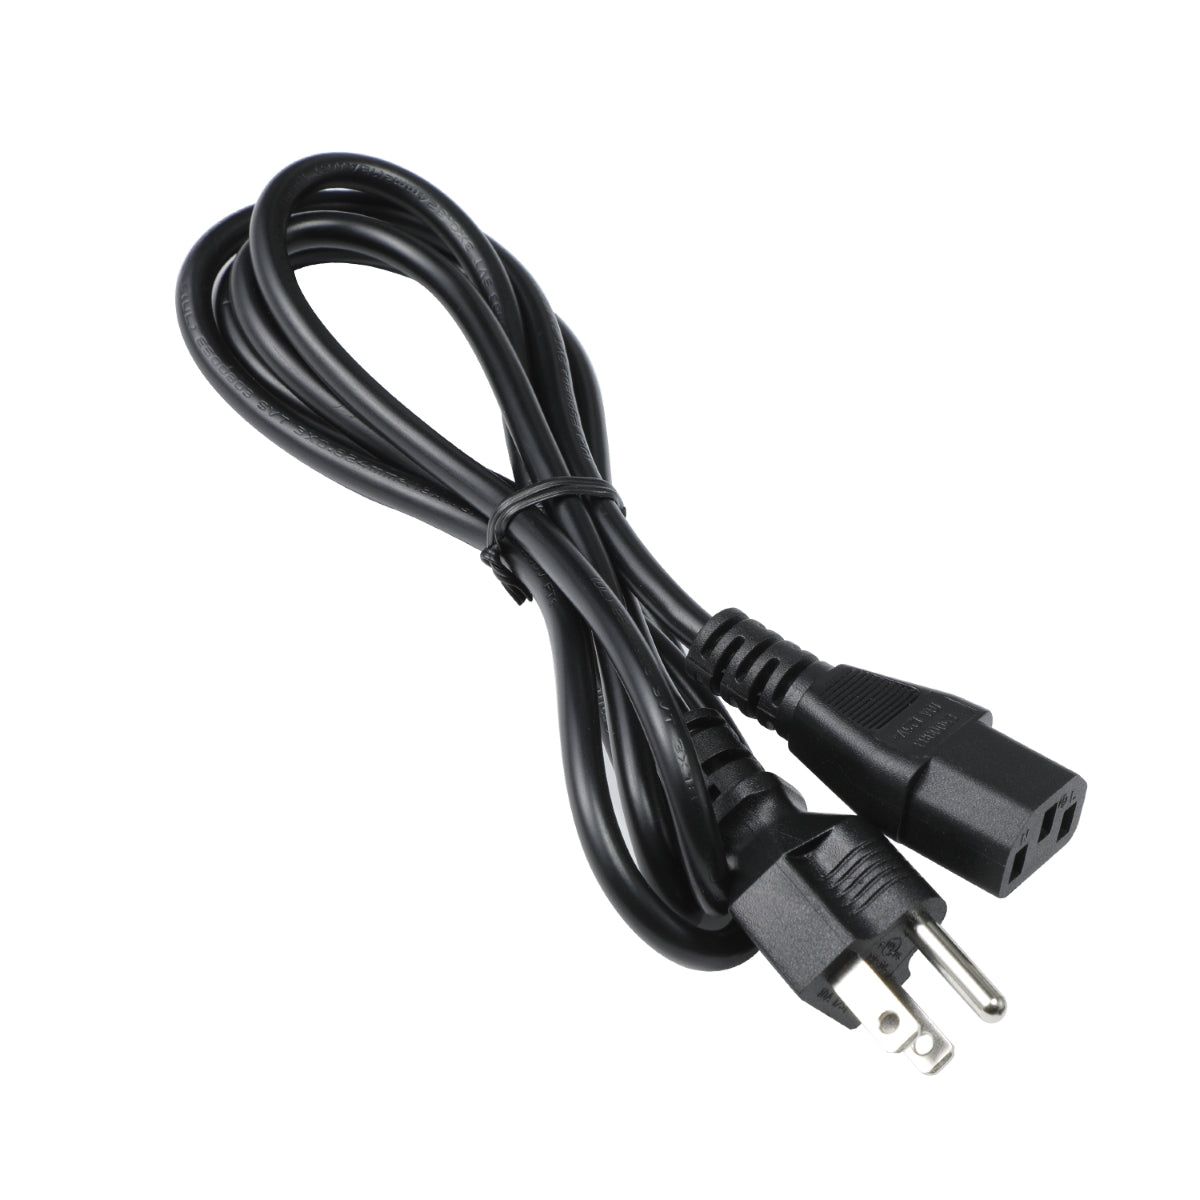 Power Cord for Dell S2722QC Monitor